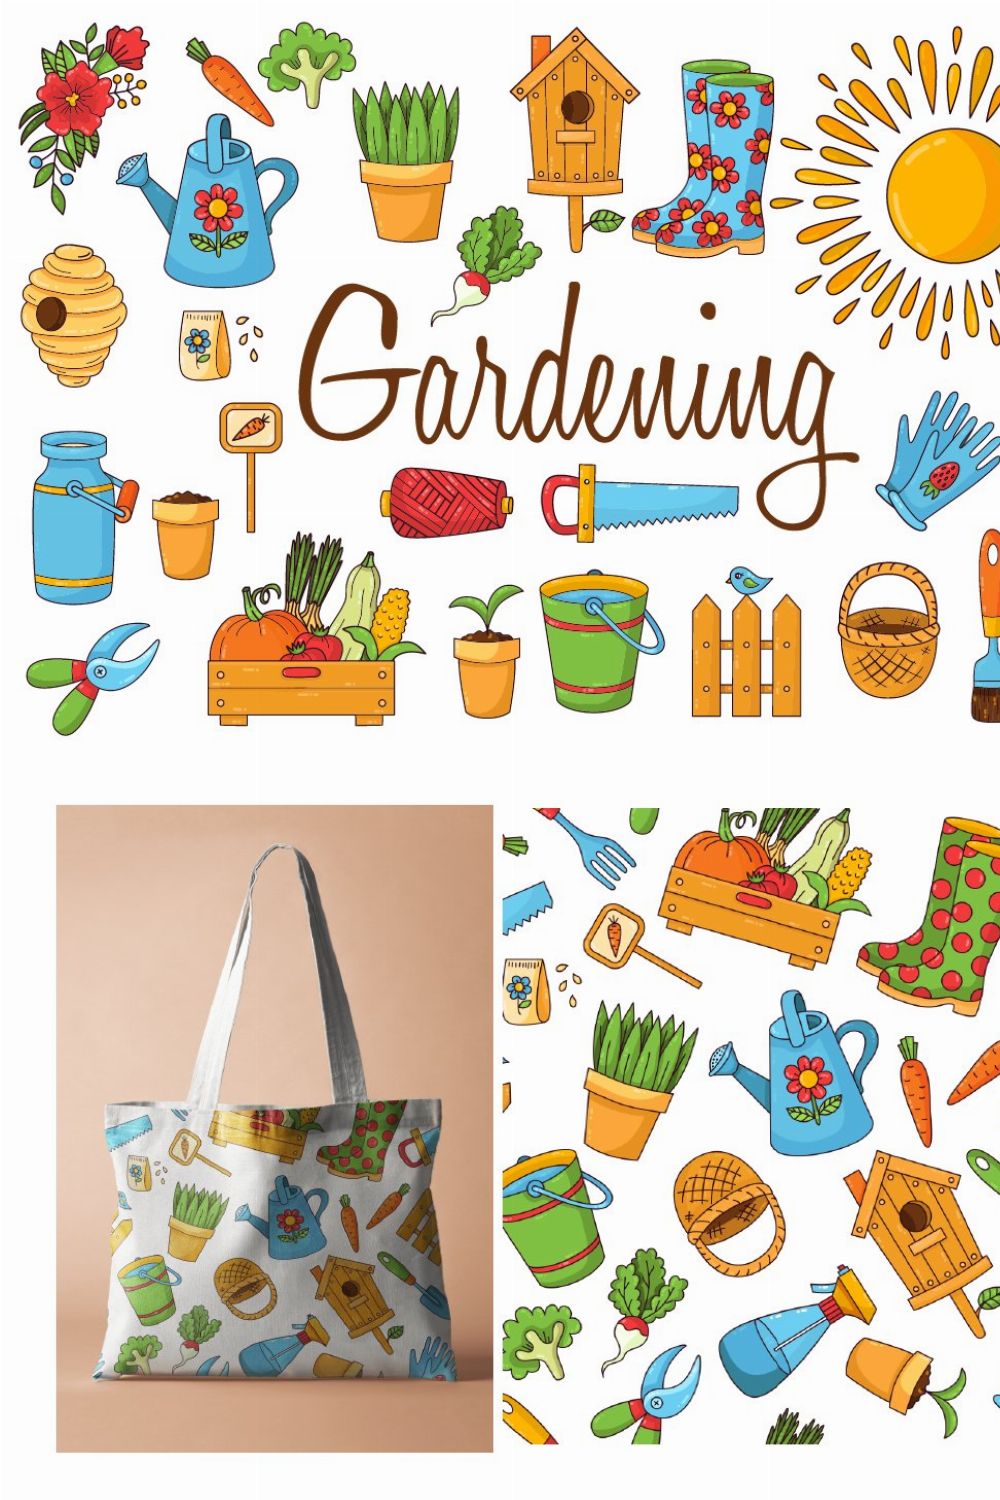 Gardening vector pack pinterest preview image.